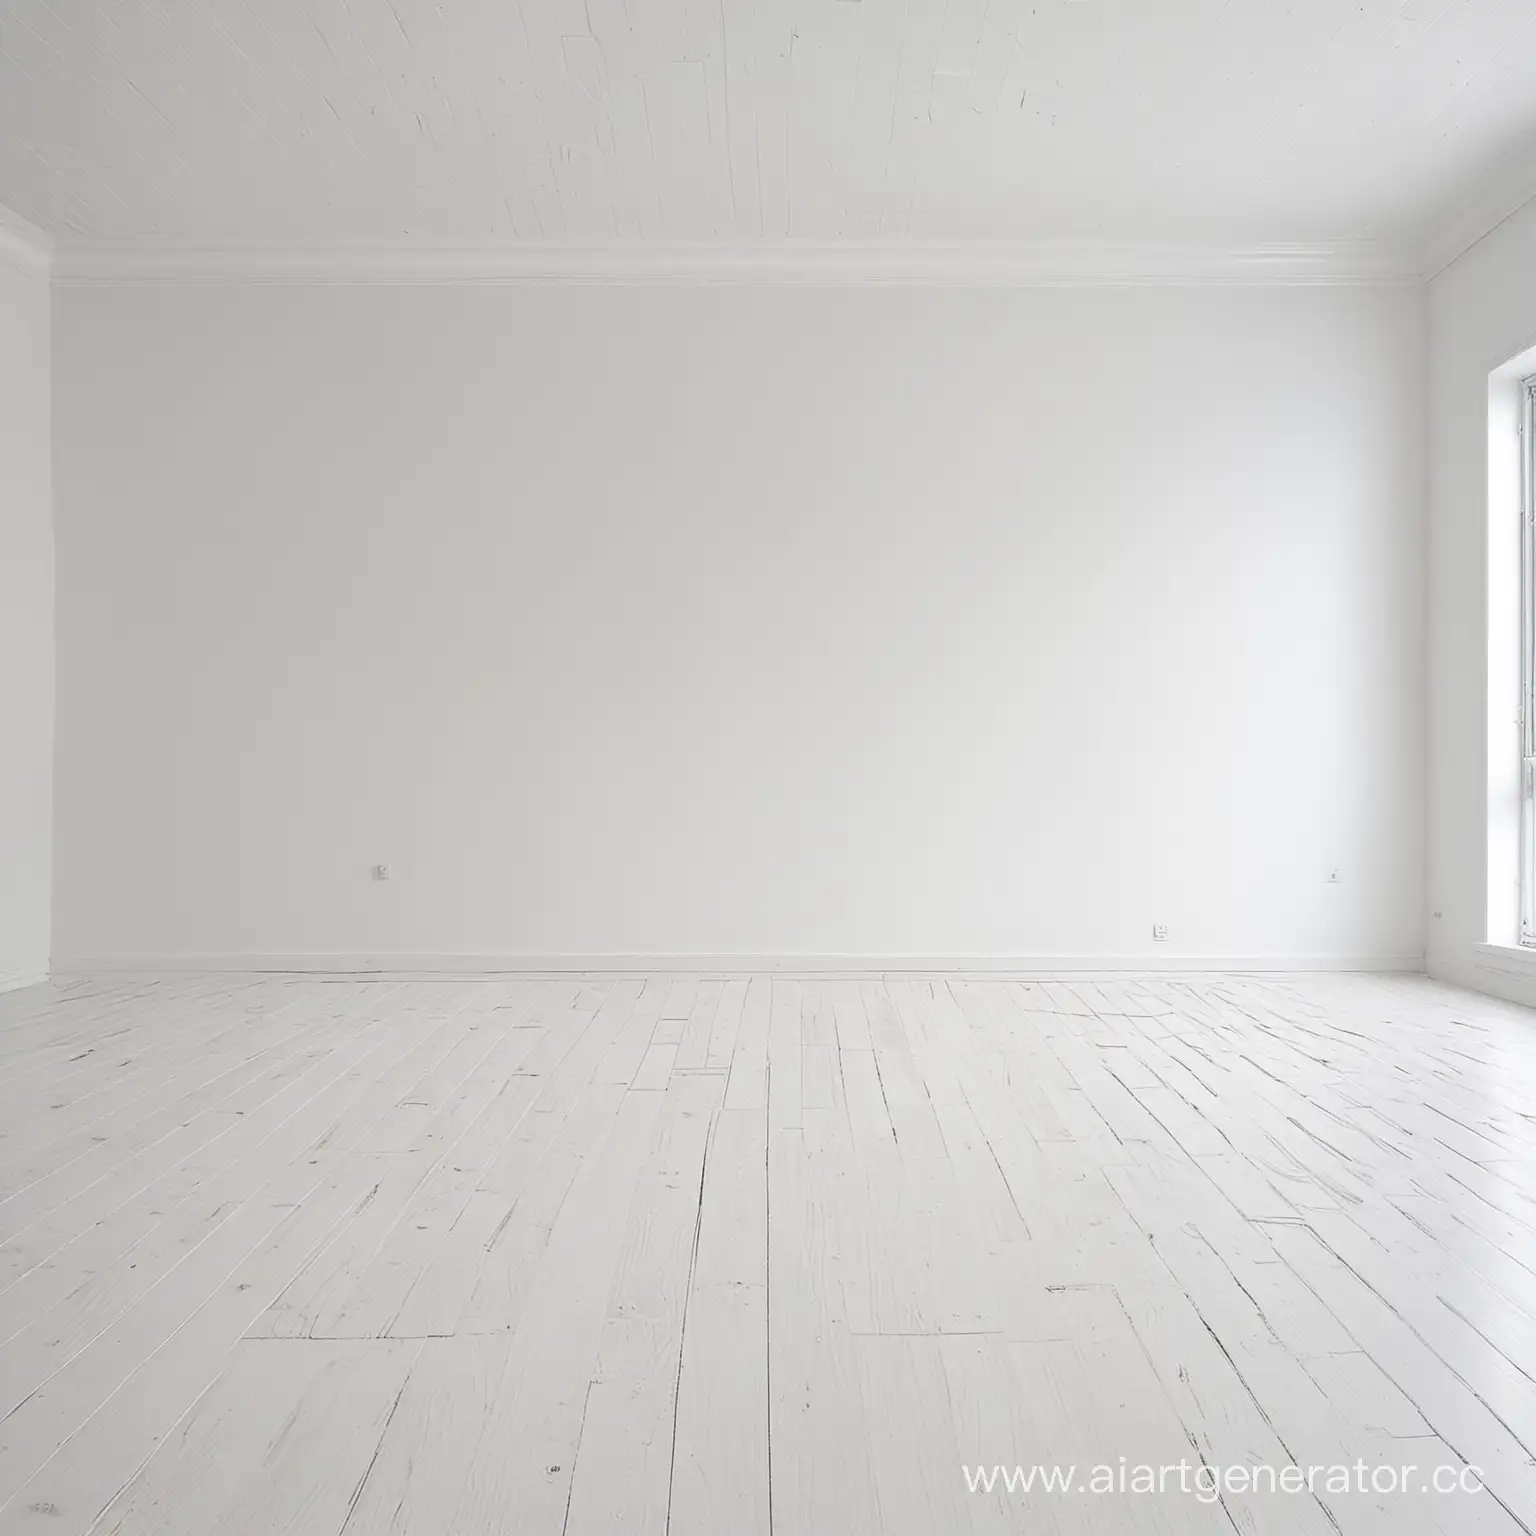 Pristine-White-Room-with-Gleaming-Wooden-Floor